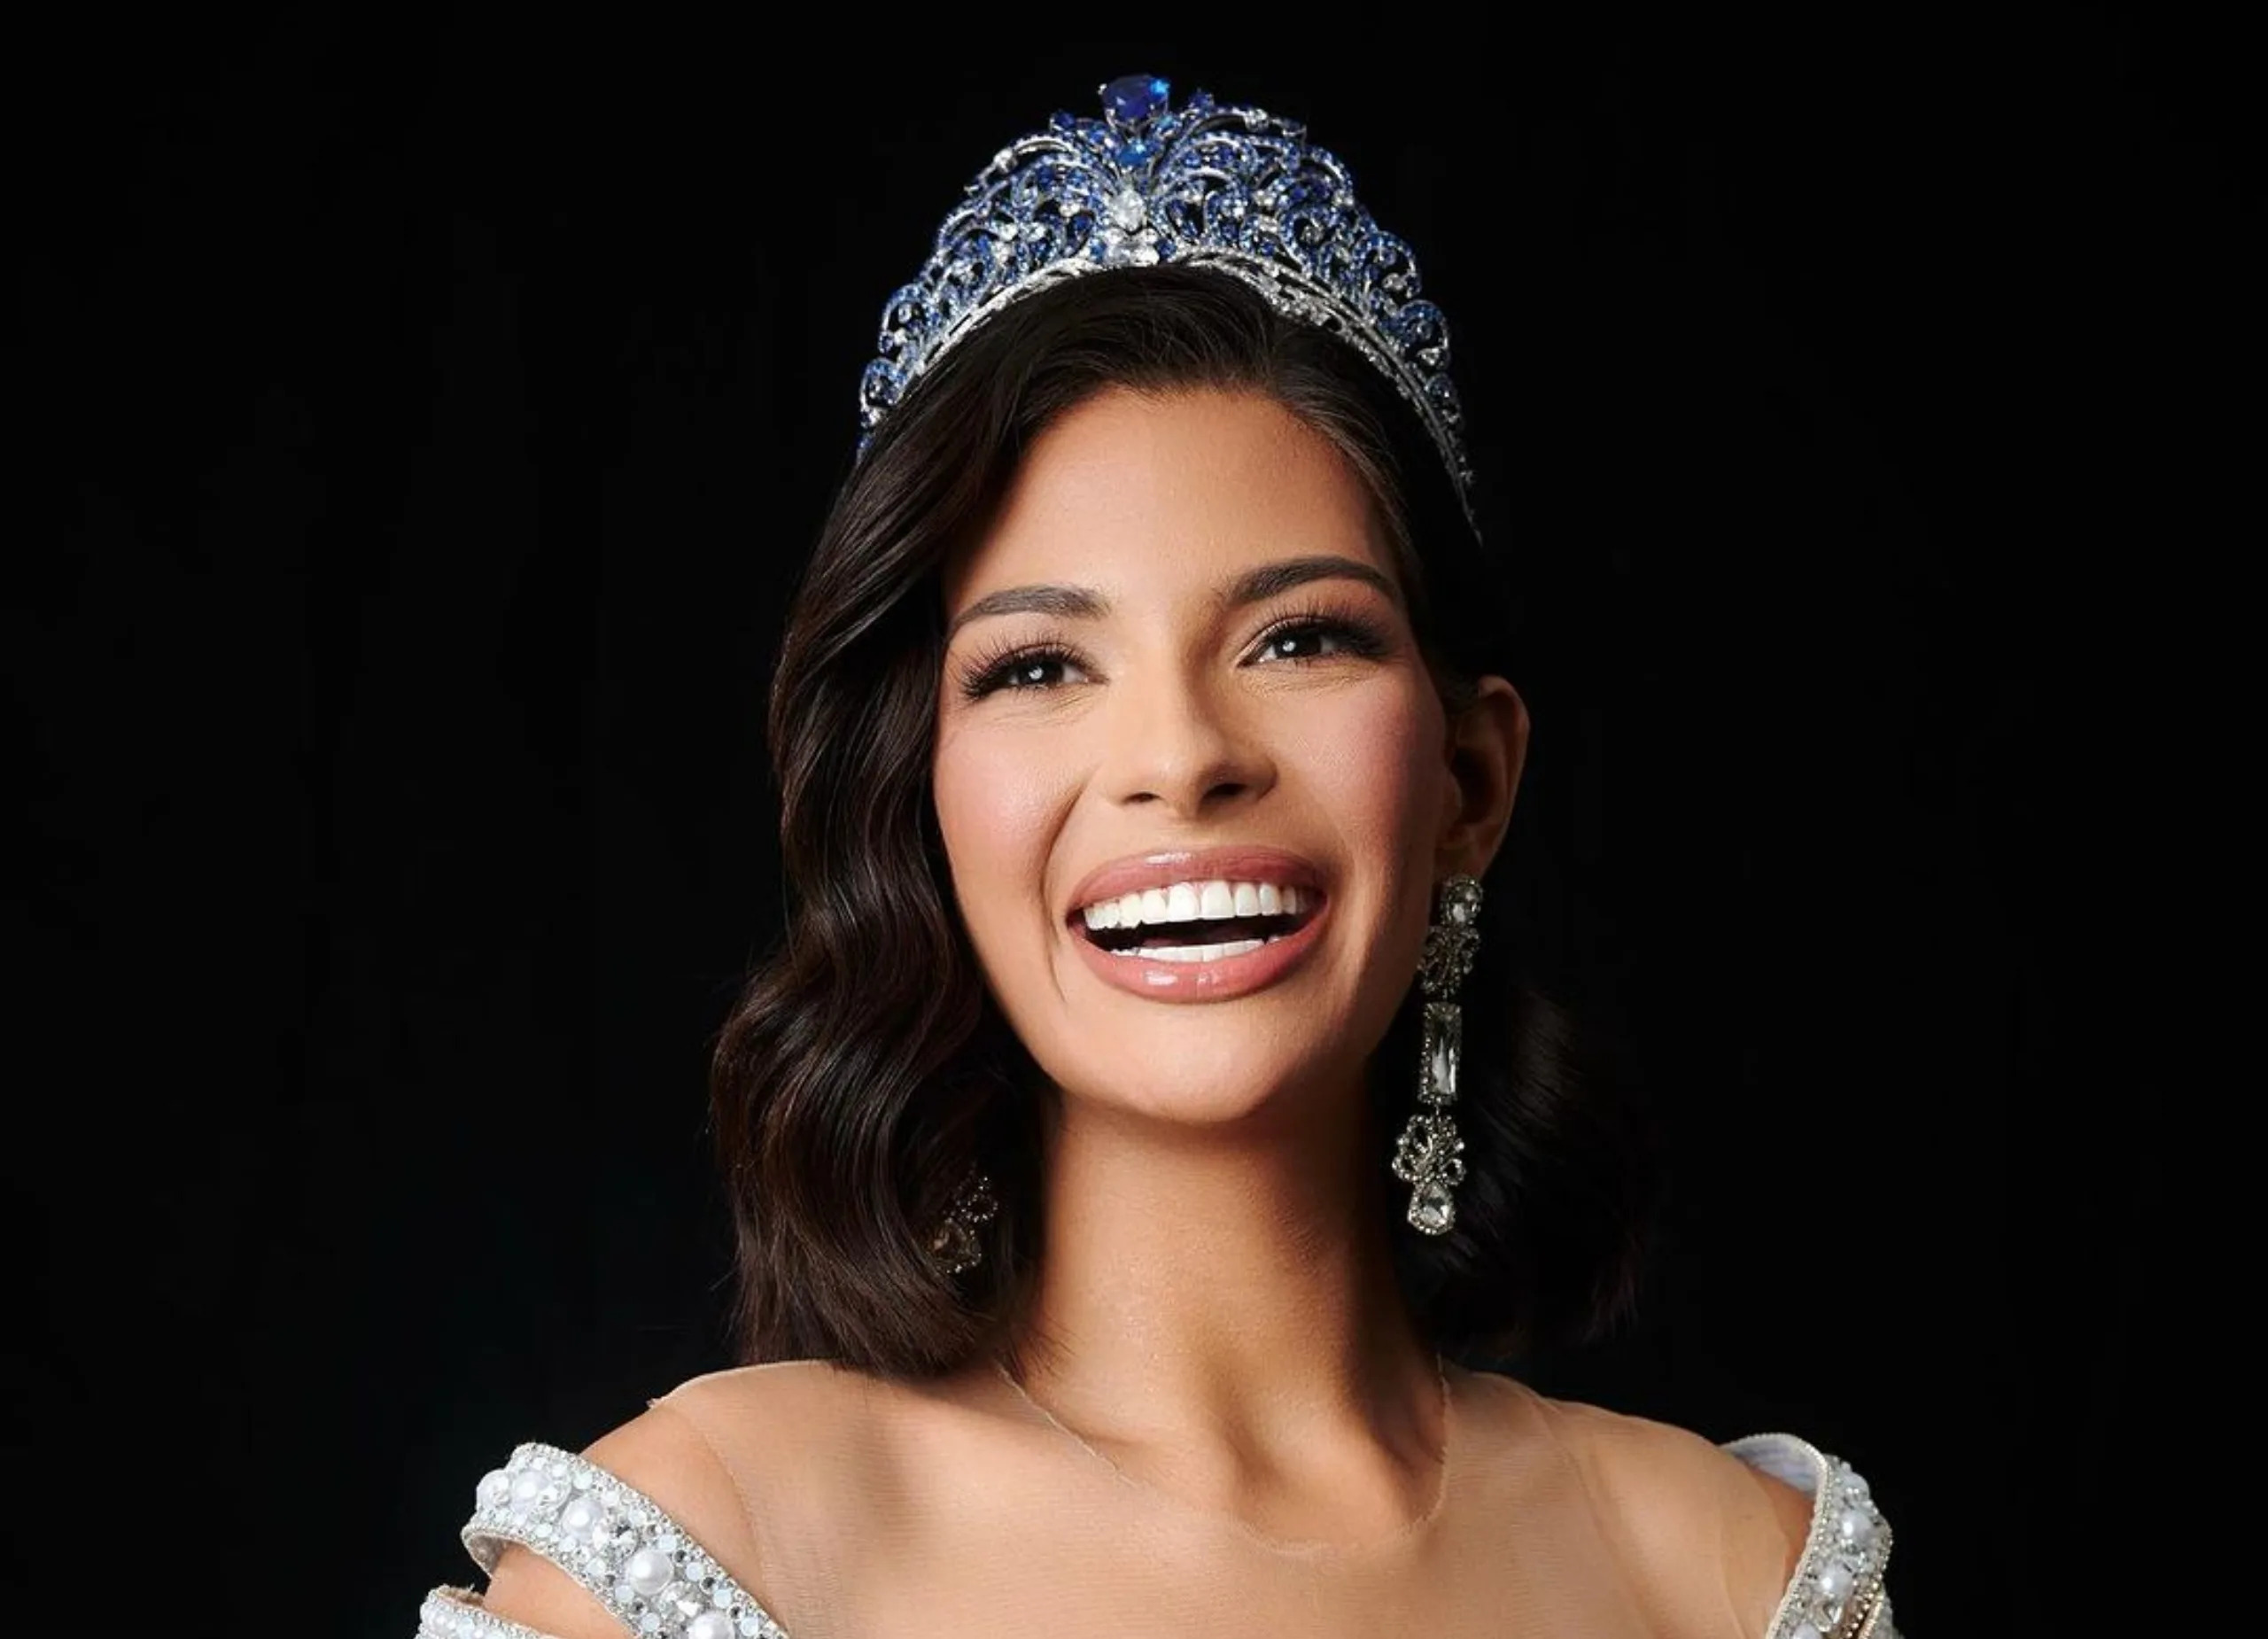 Miss Universe 2023 Sheynnis Palacios of Nicaragua wearing the crown